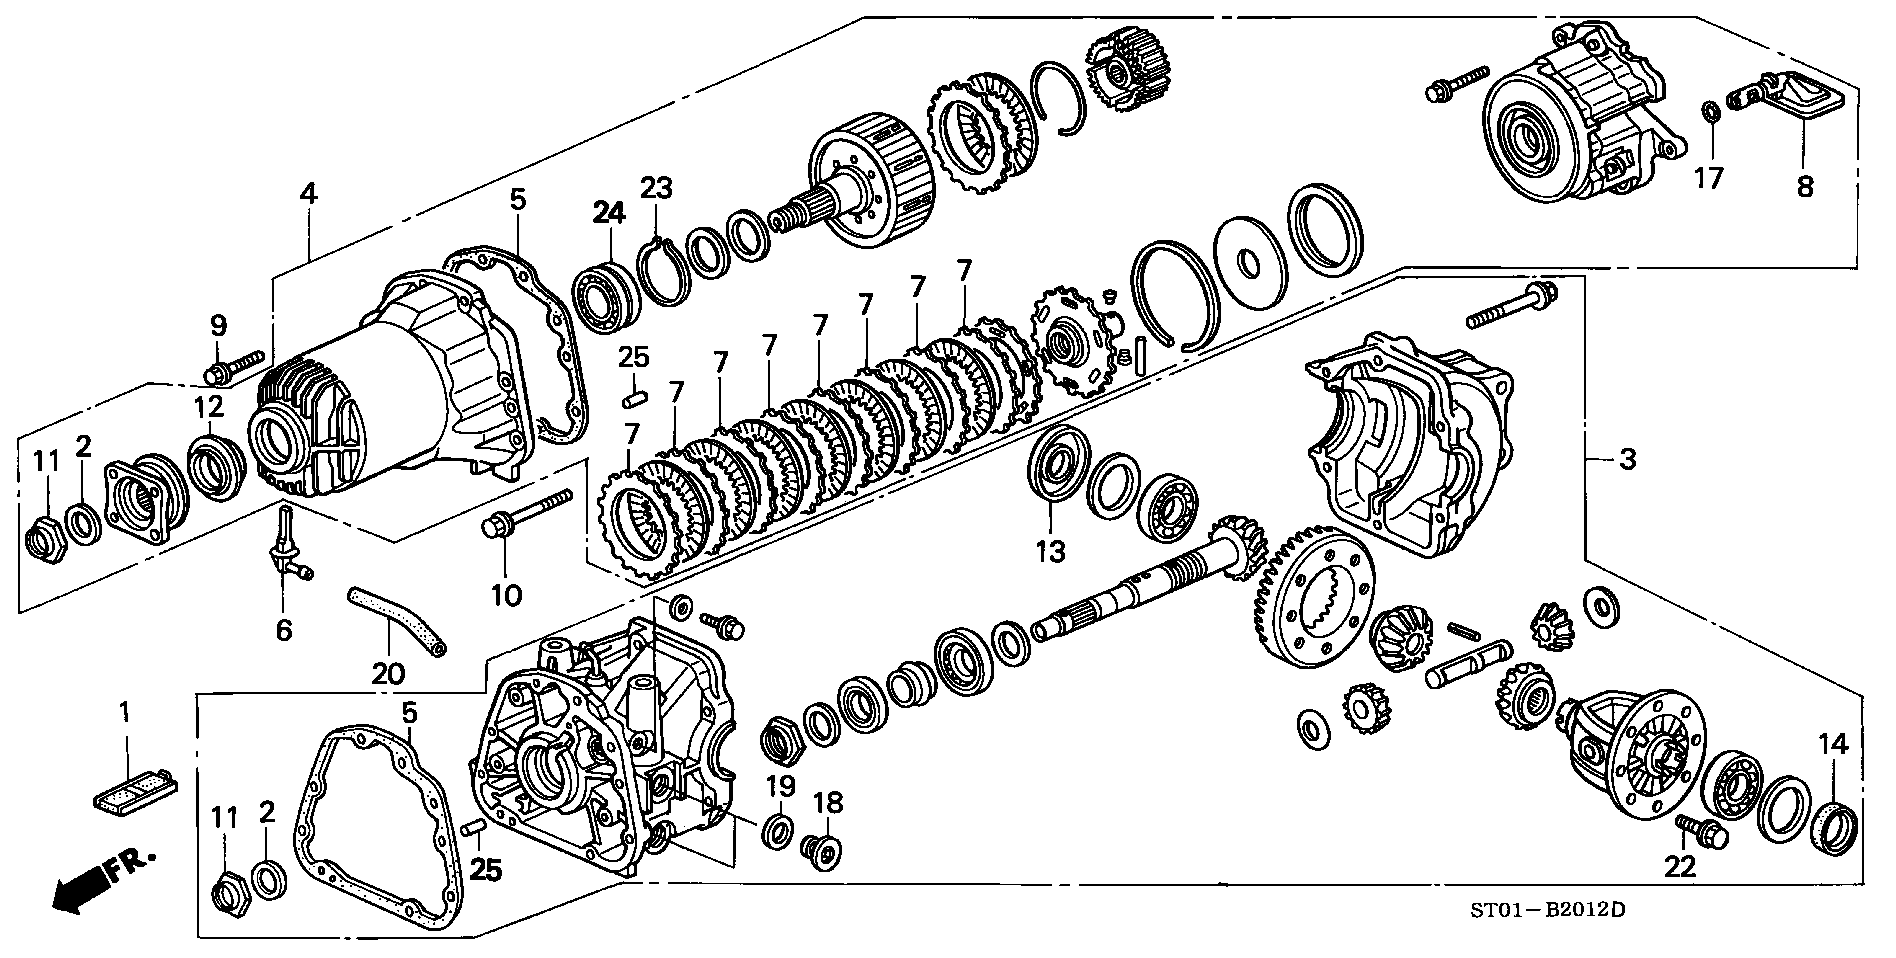 REAR DIFFERENTIAL(MA6:110)